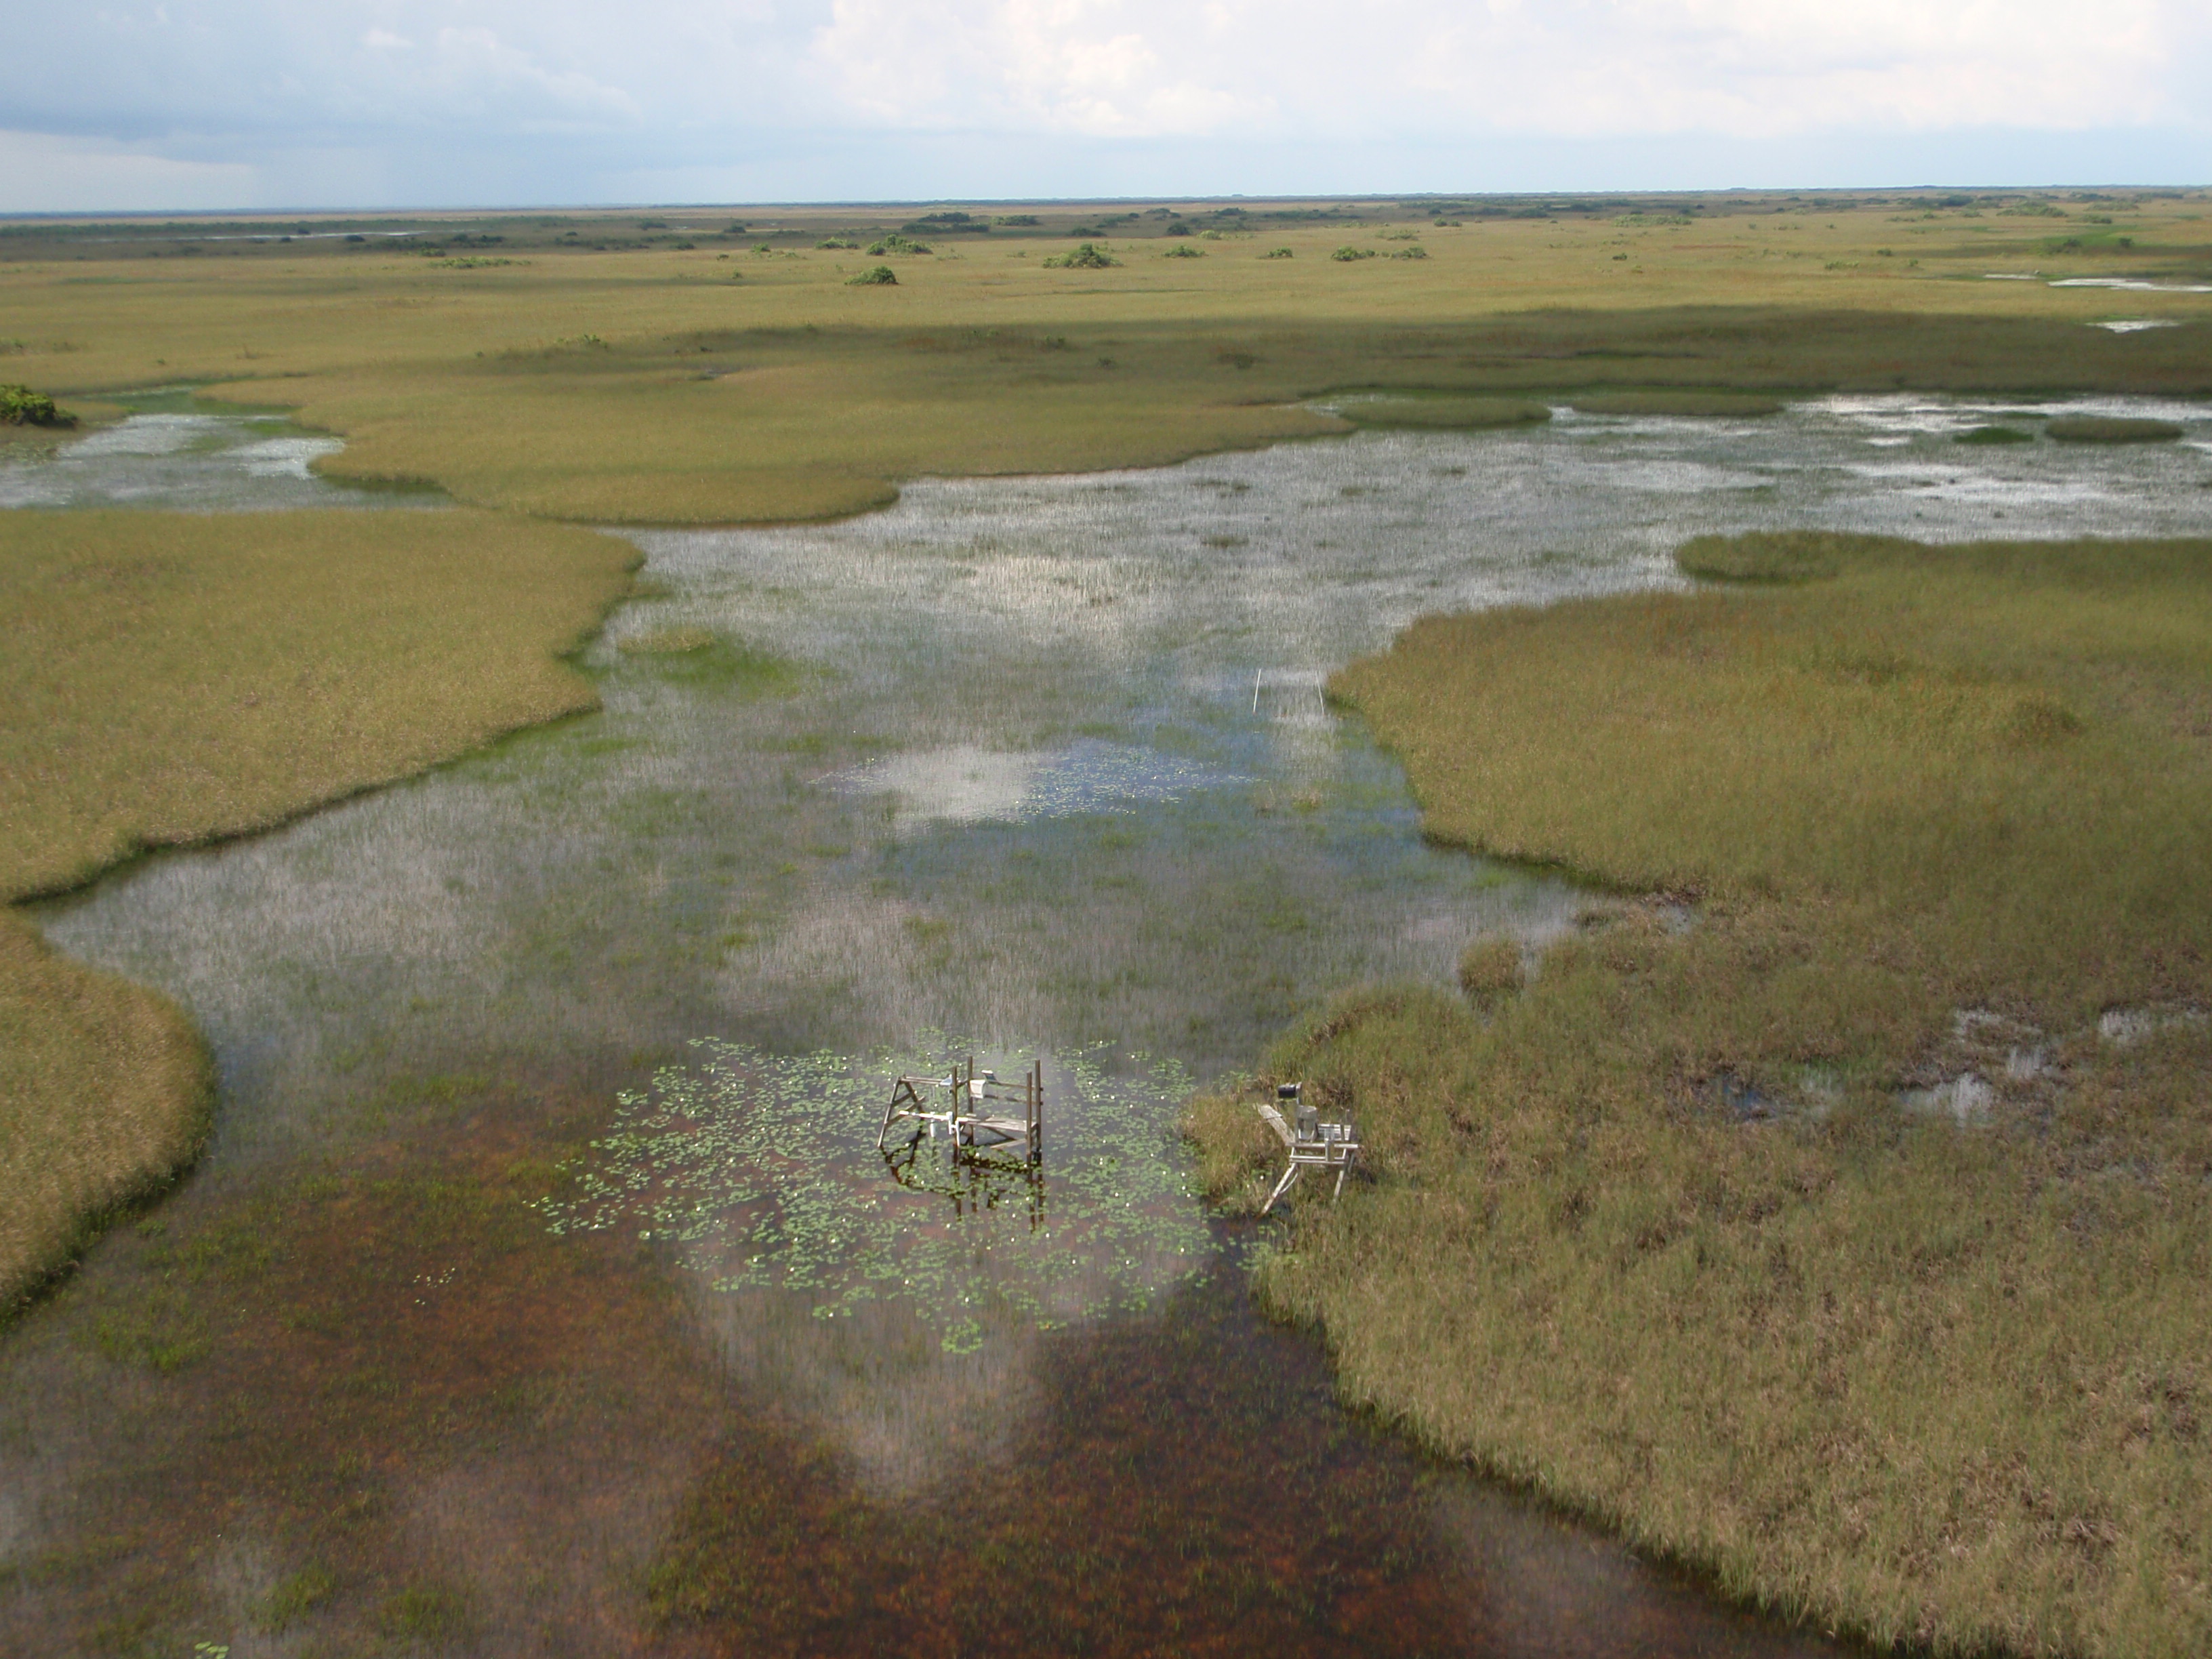 Aerial photo of SRS-1d in Shark River Slough